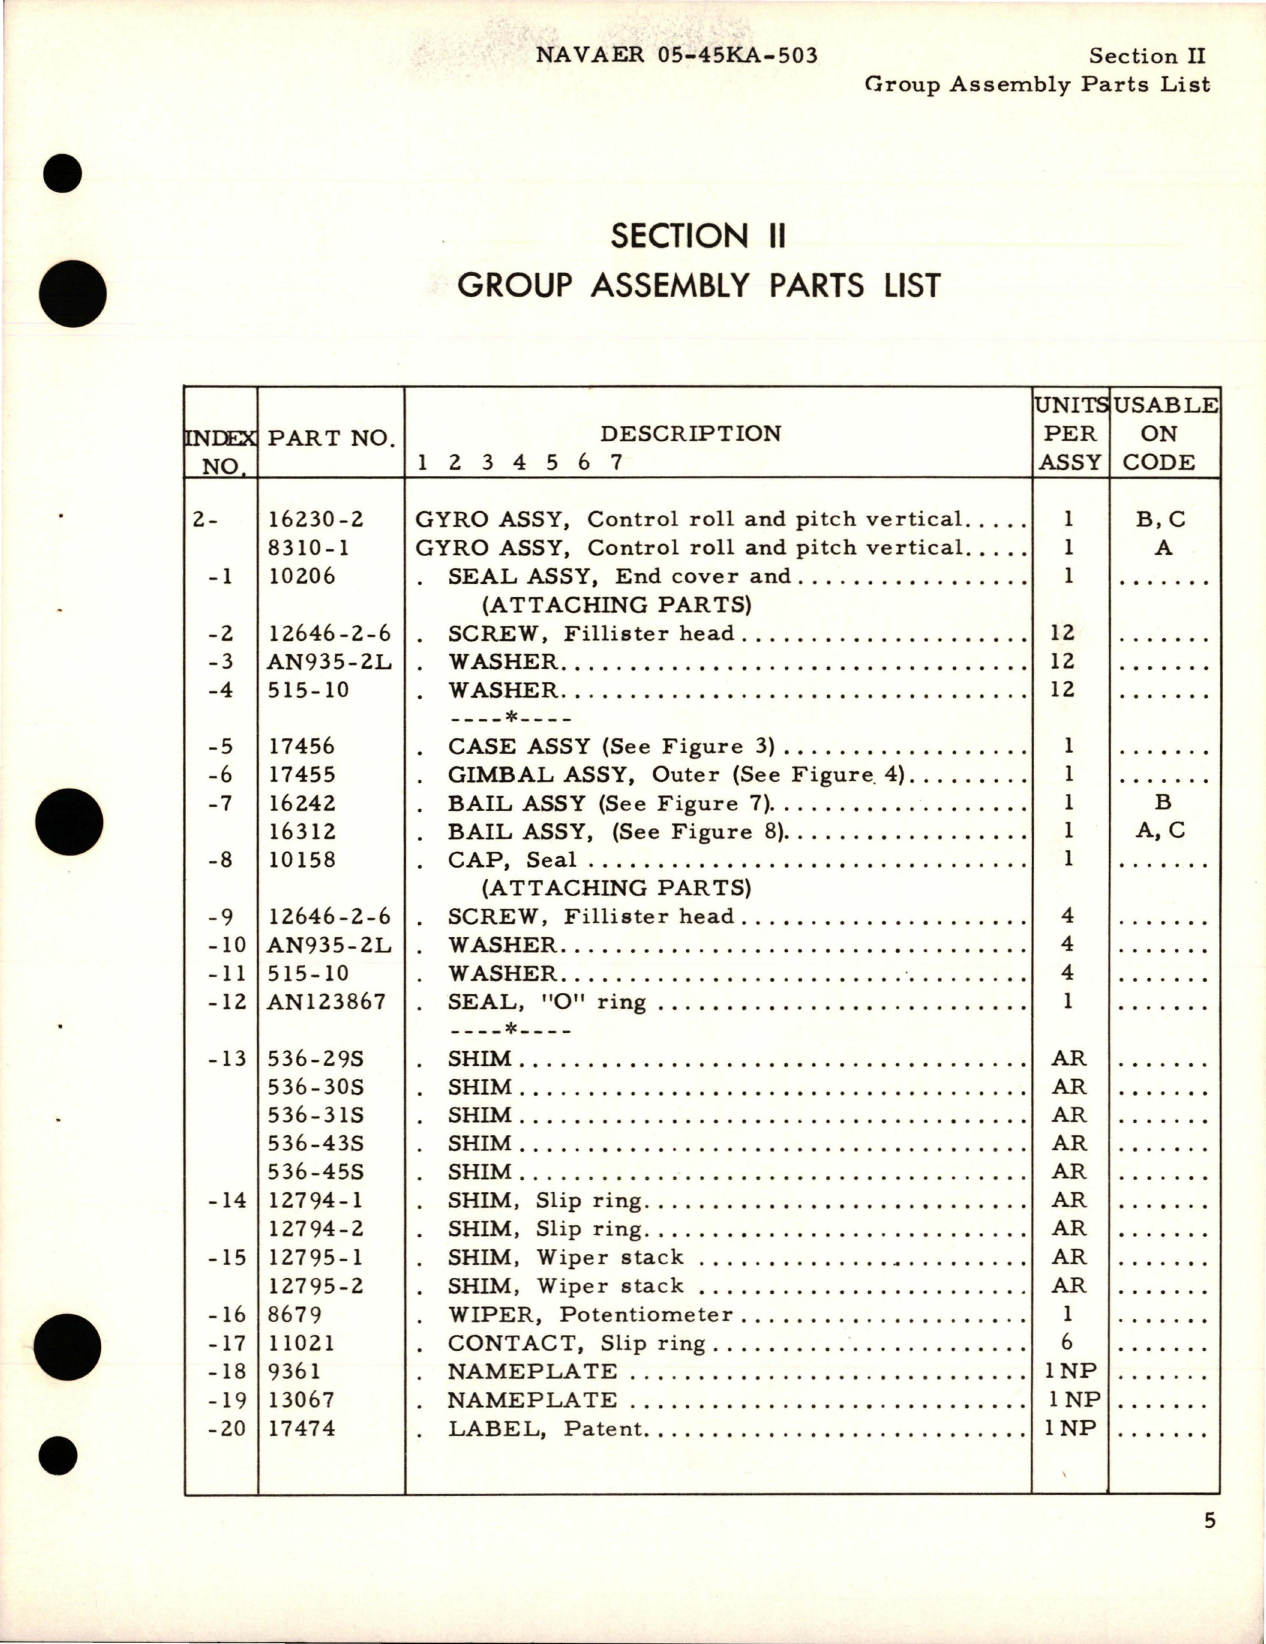 Sample page 7 from AirCorps Library document: Illustrated Parts Breakdown for K-3 Remote Pilot Kit